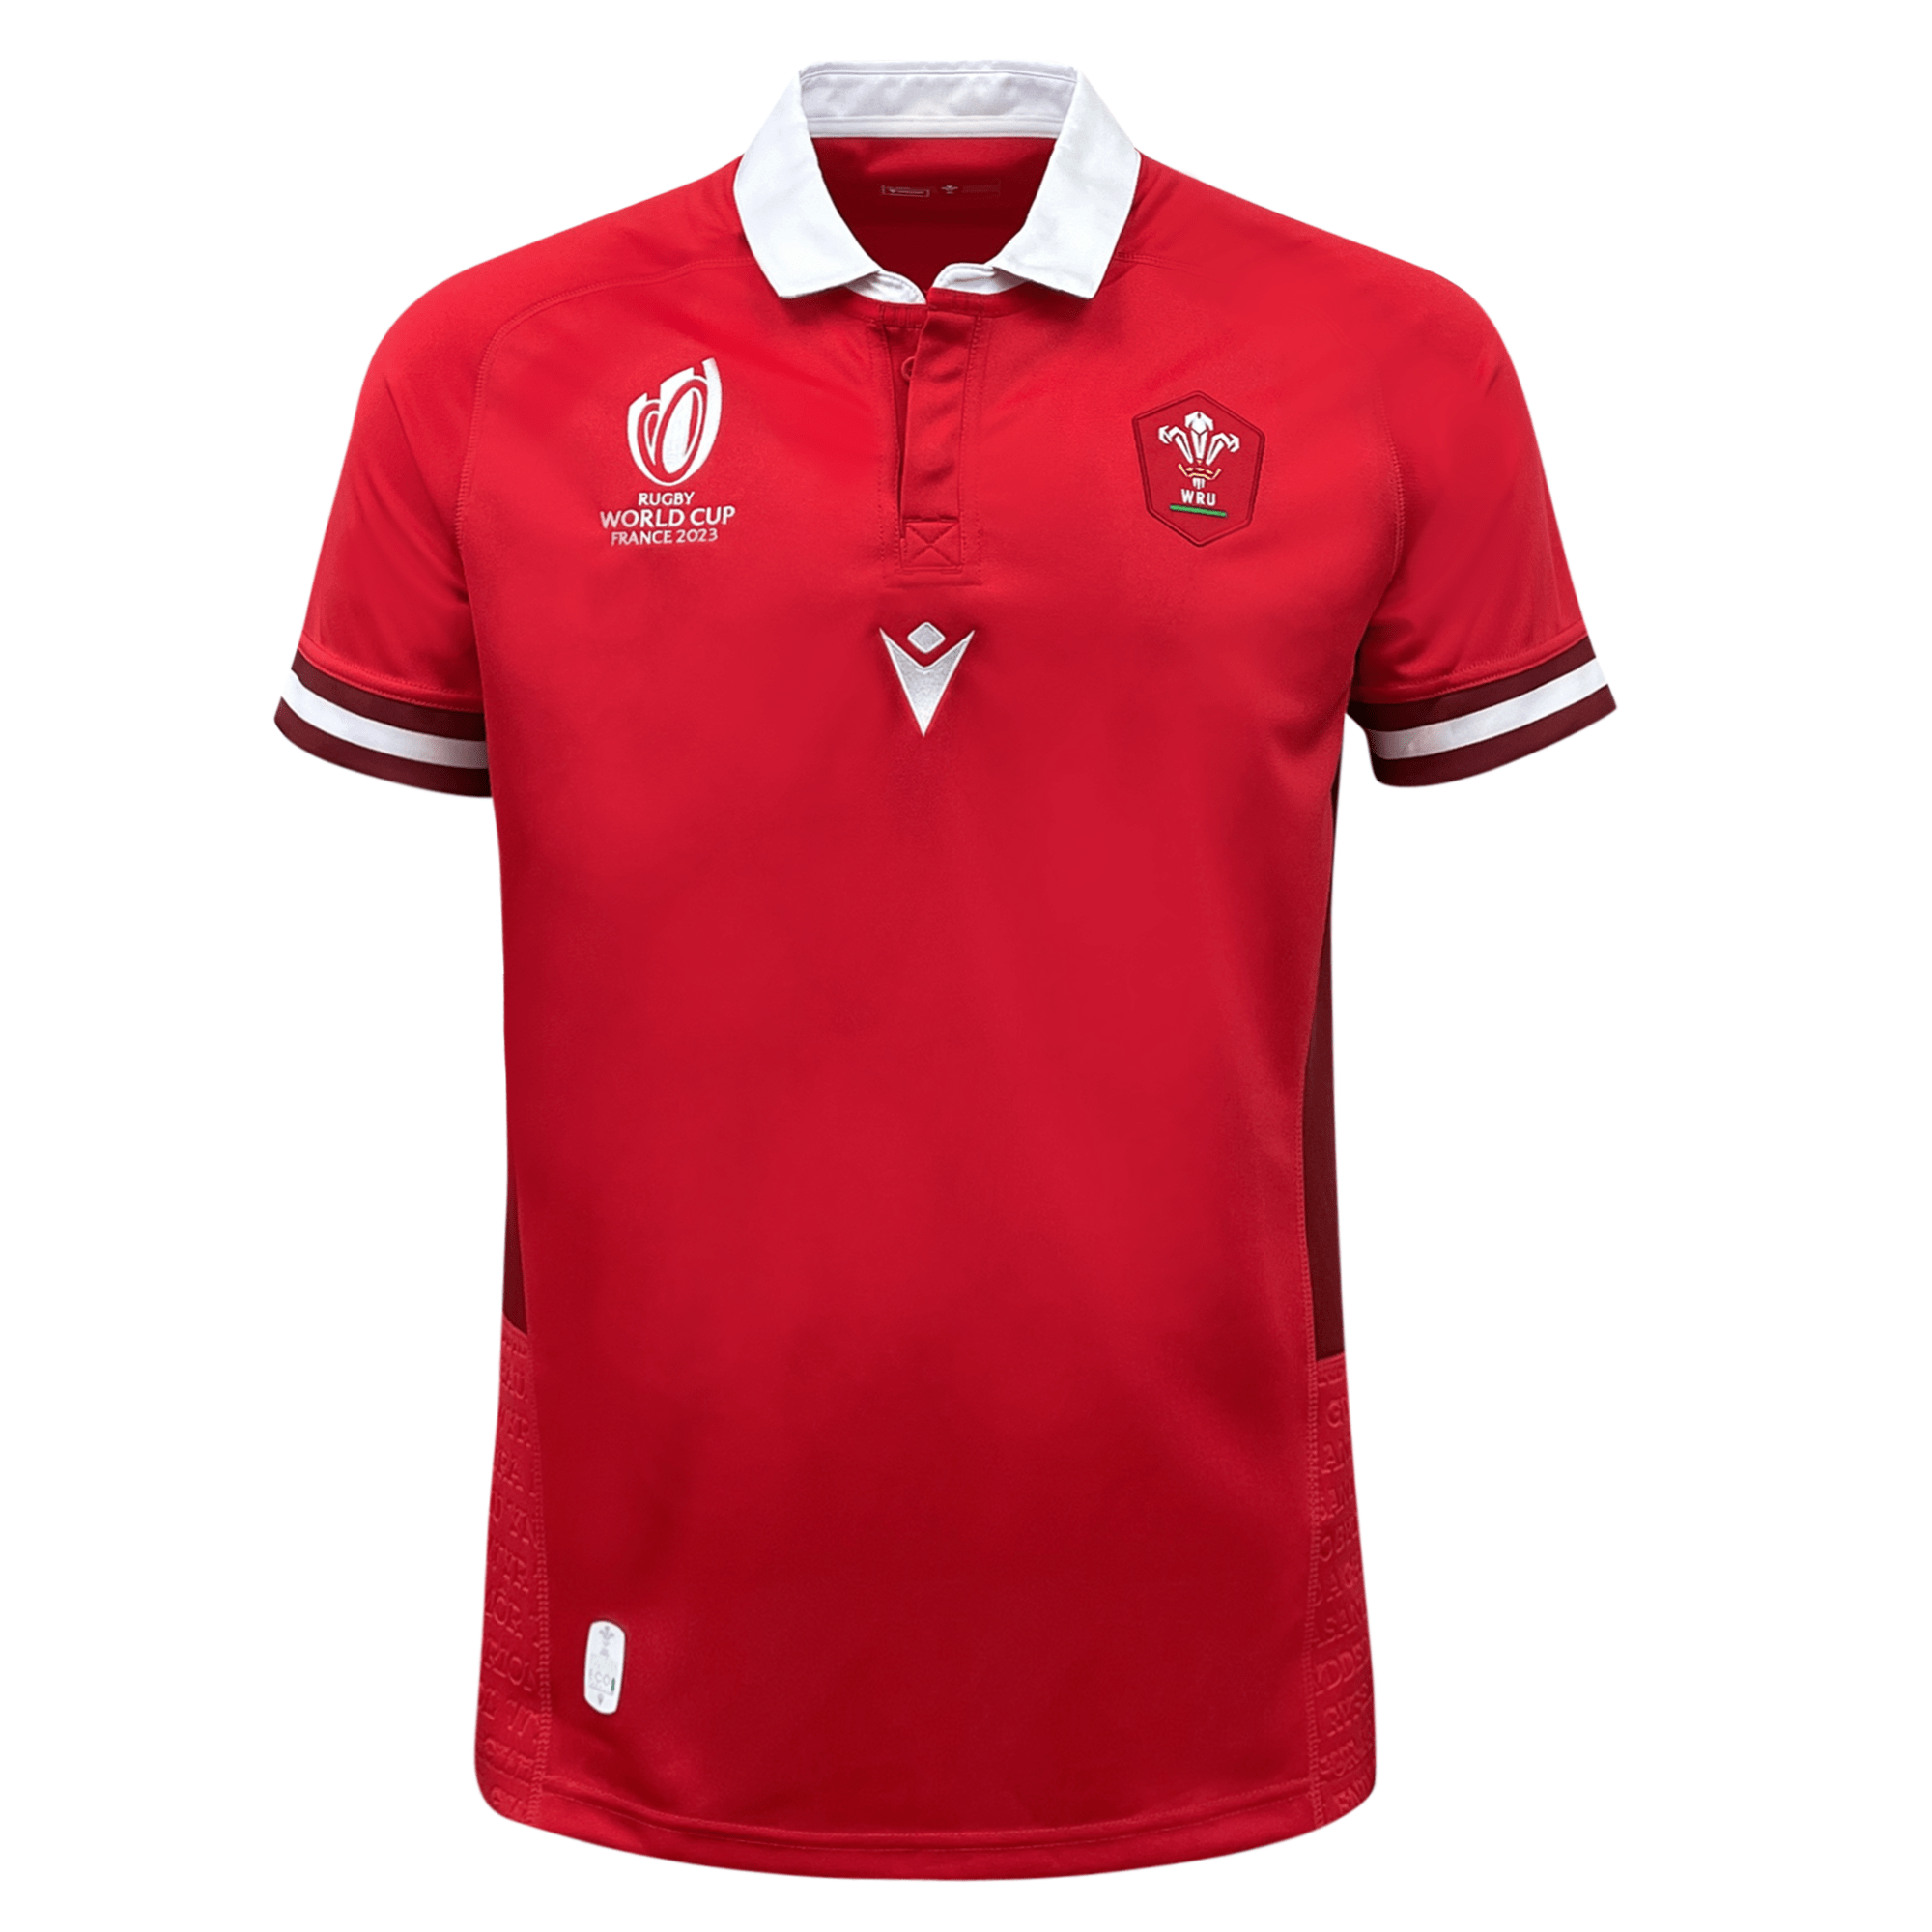 Wales Rugby World Cup 23 Home Jersey by Macron | World Rugby Shop